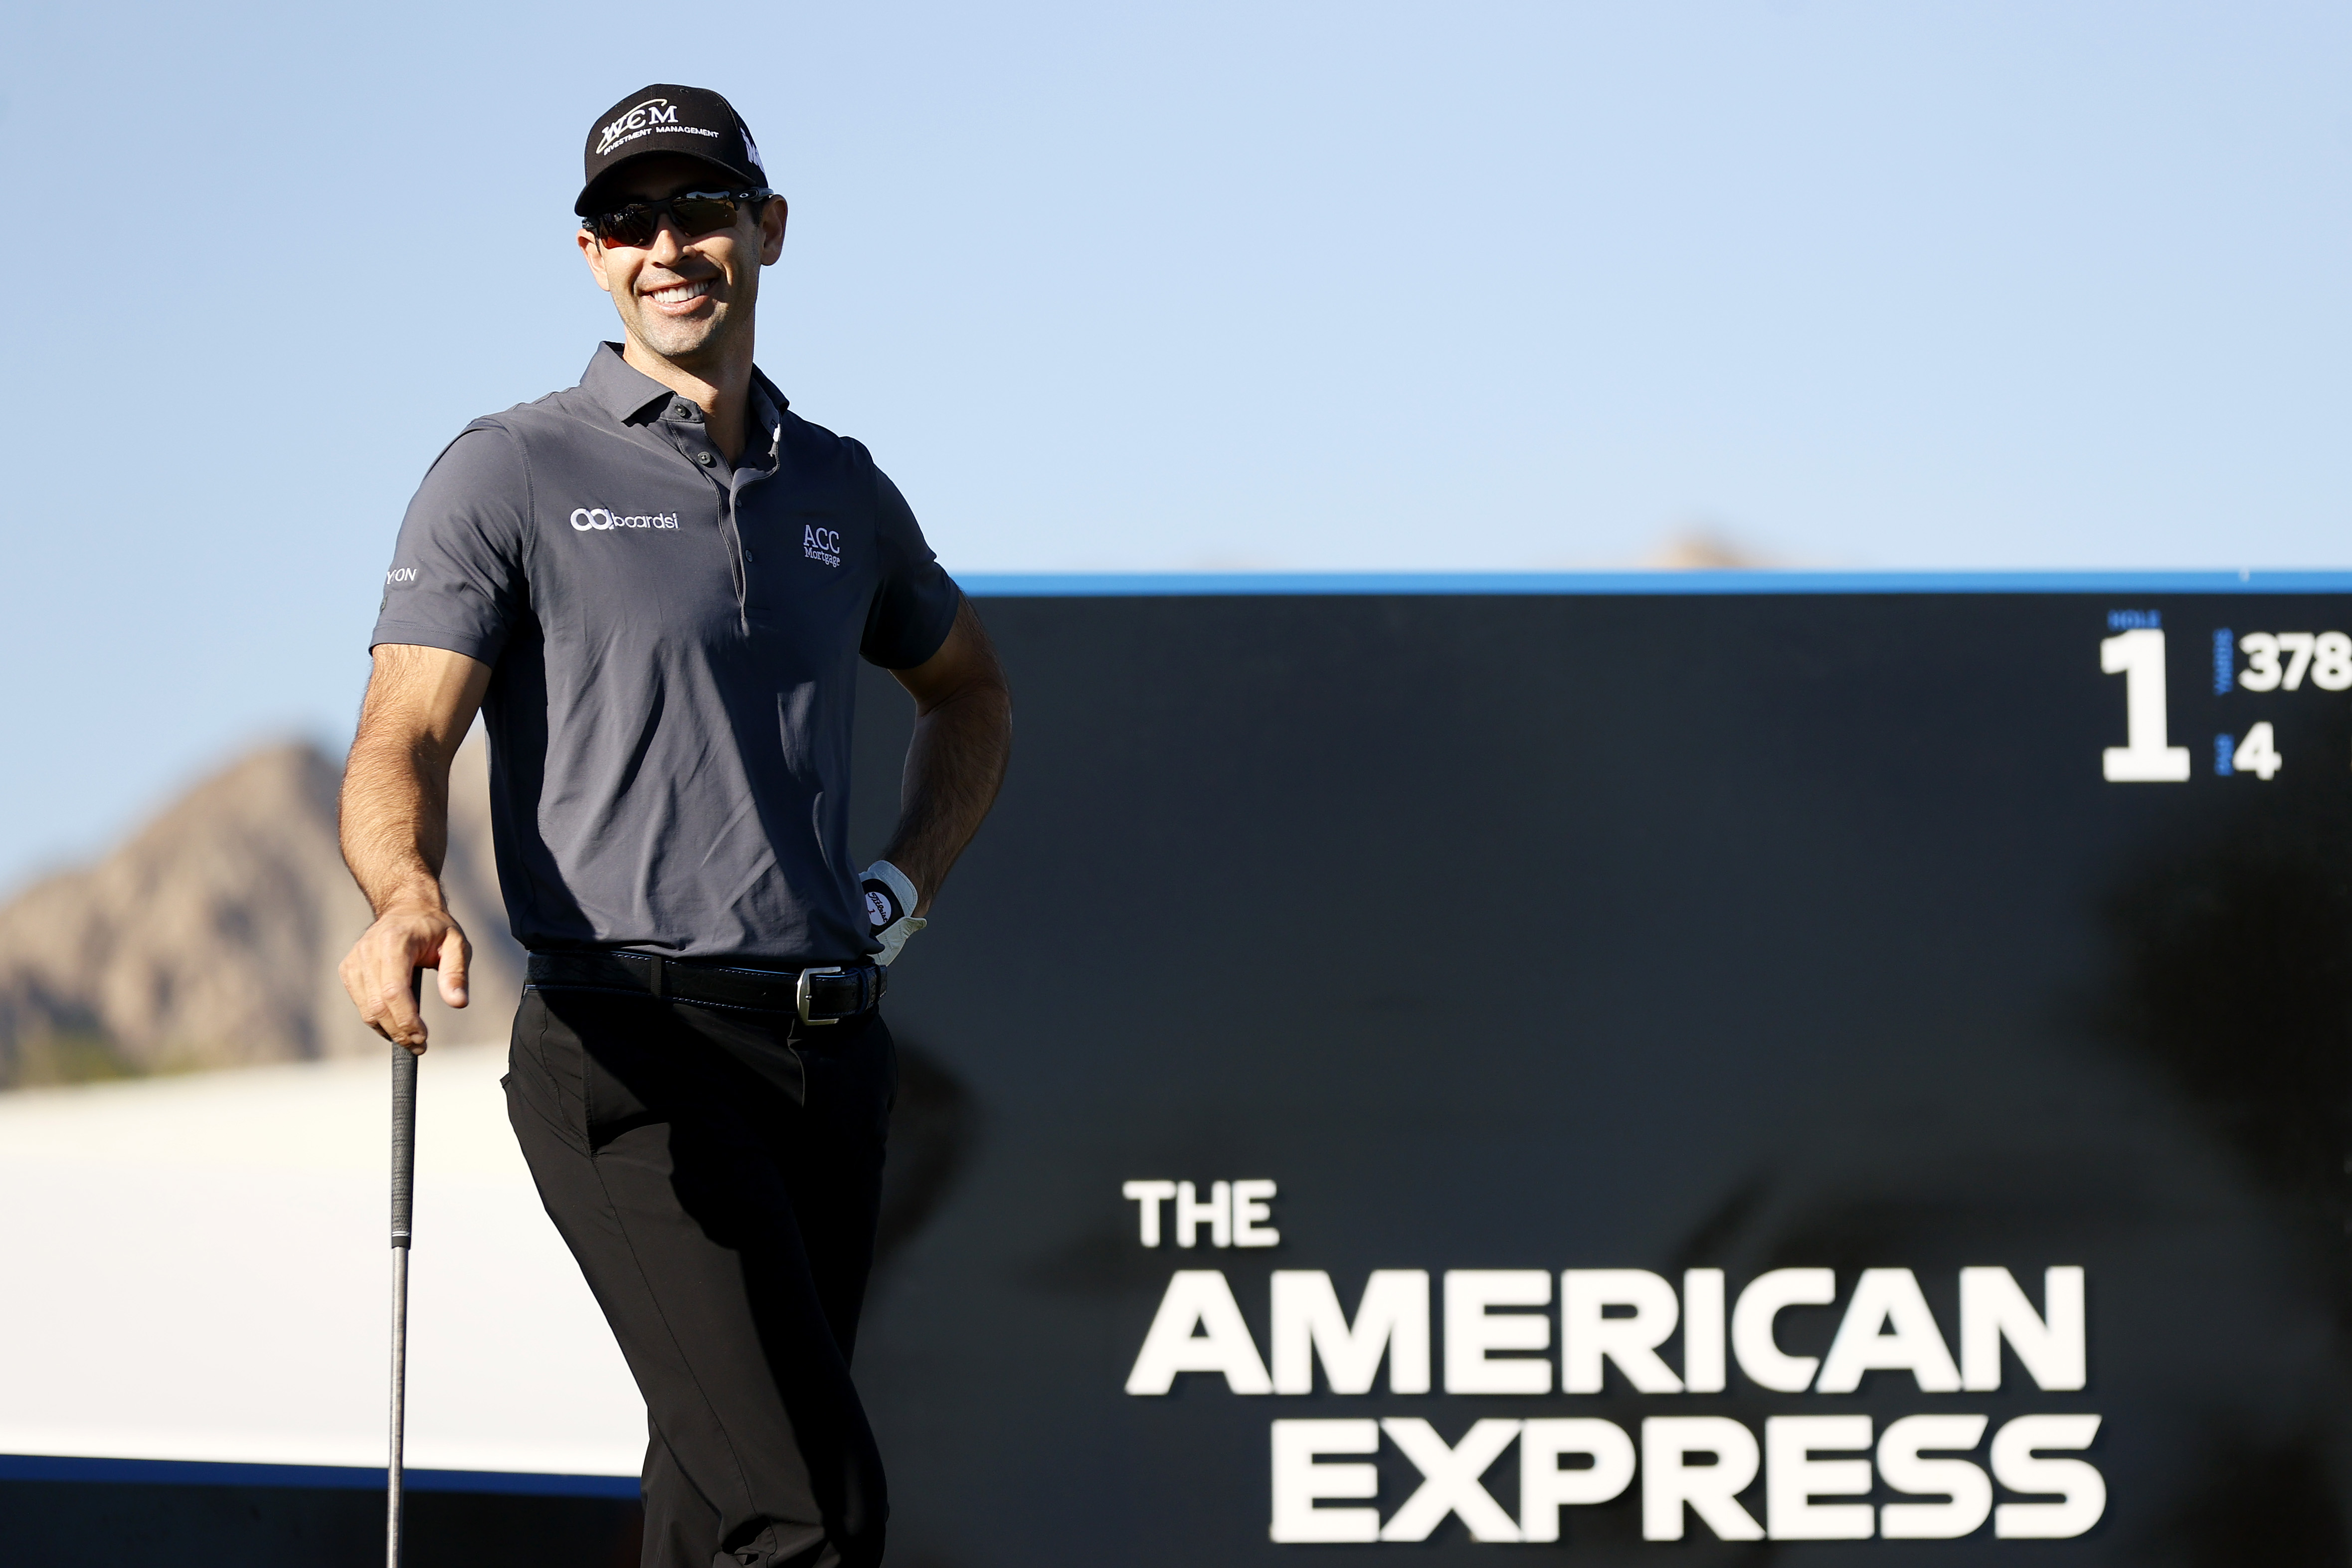 Cameron Tringale reacts on the first hole during the second round of The American Express at the Jack Nicklaus Tournament Course at PGA West on January 21, 2022 in La Quinta, California.